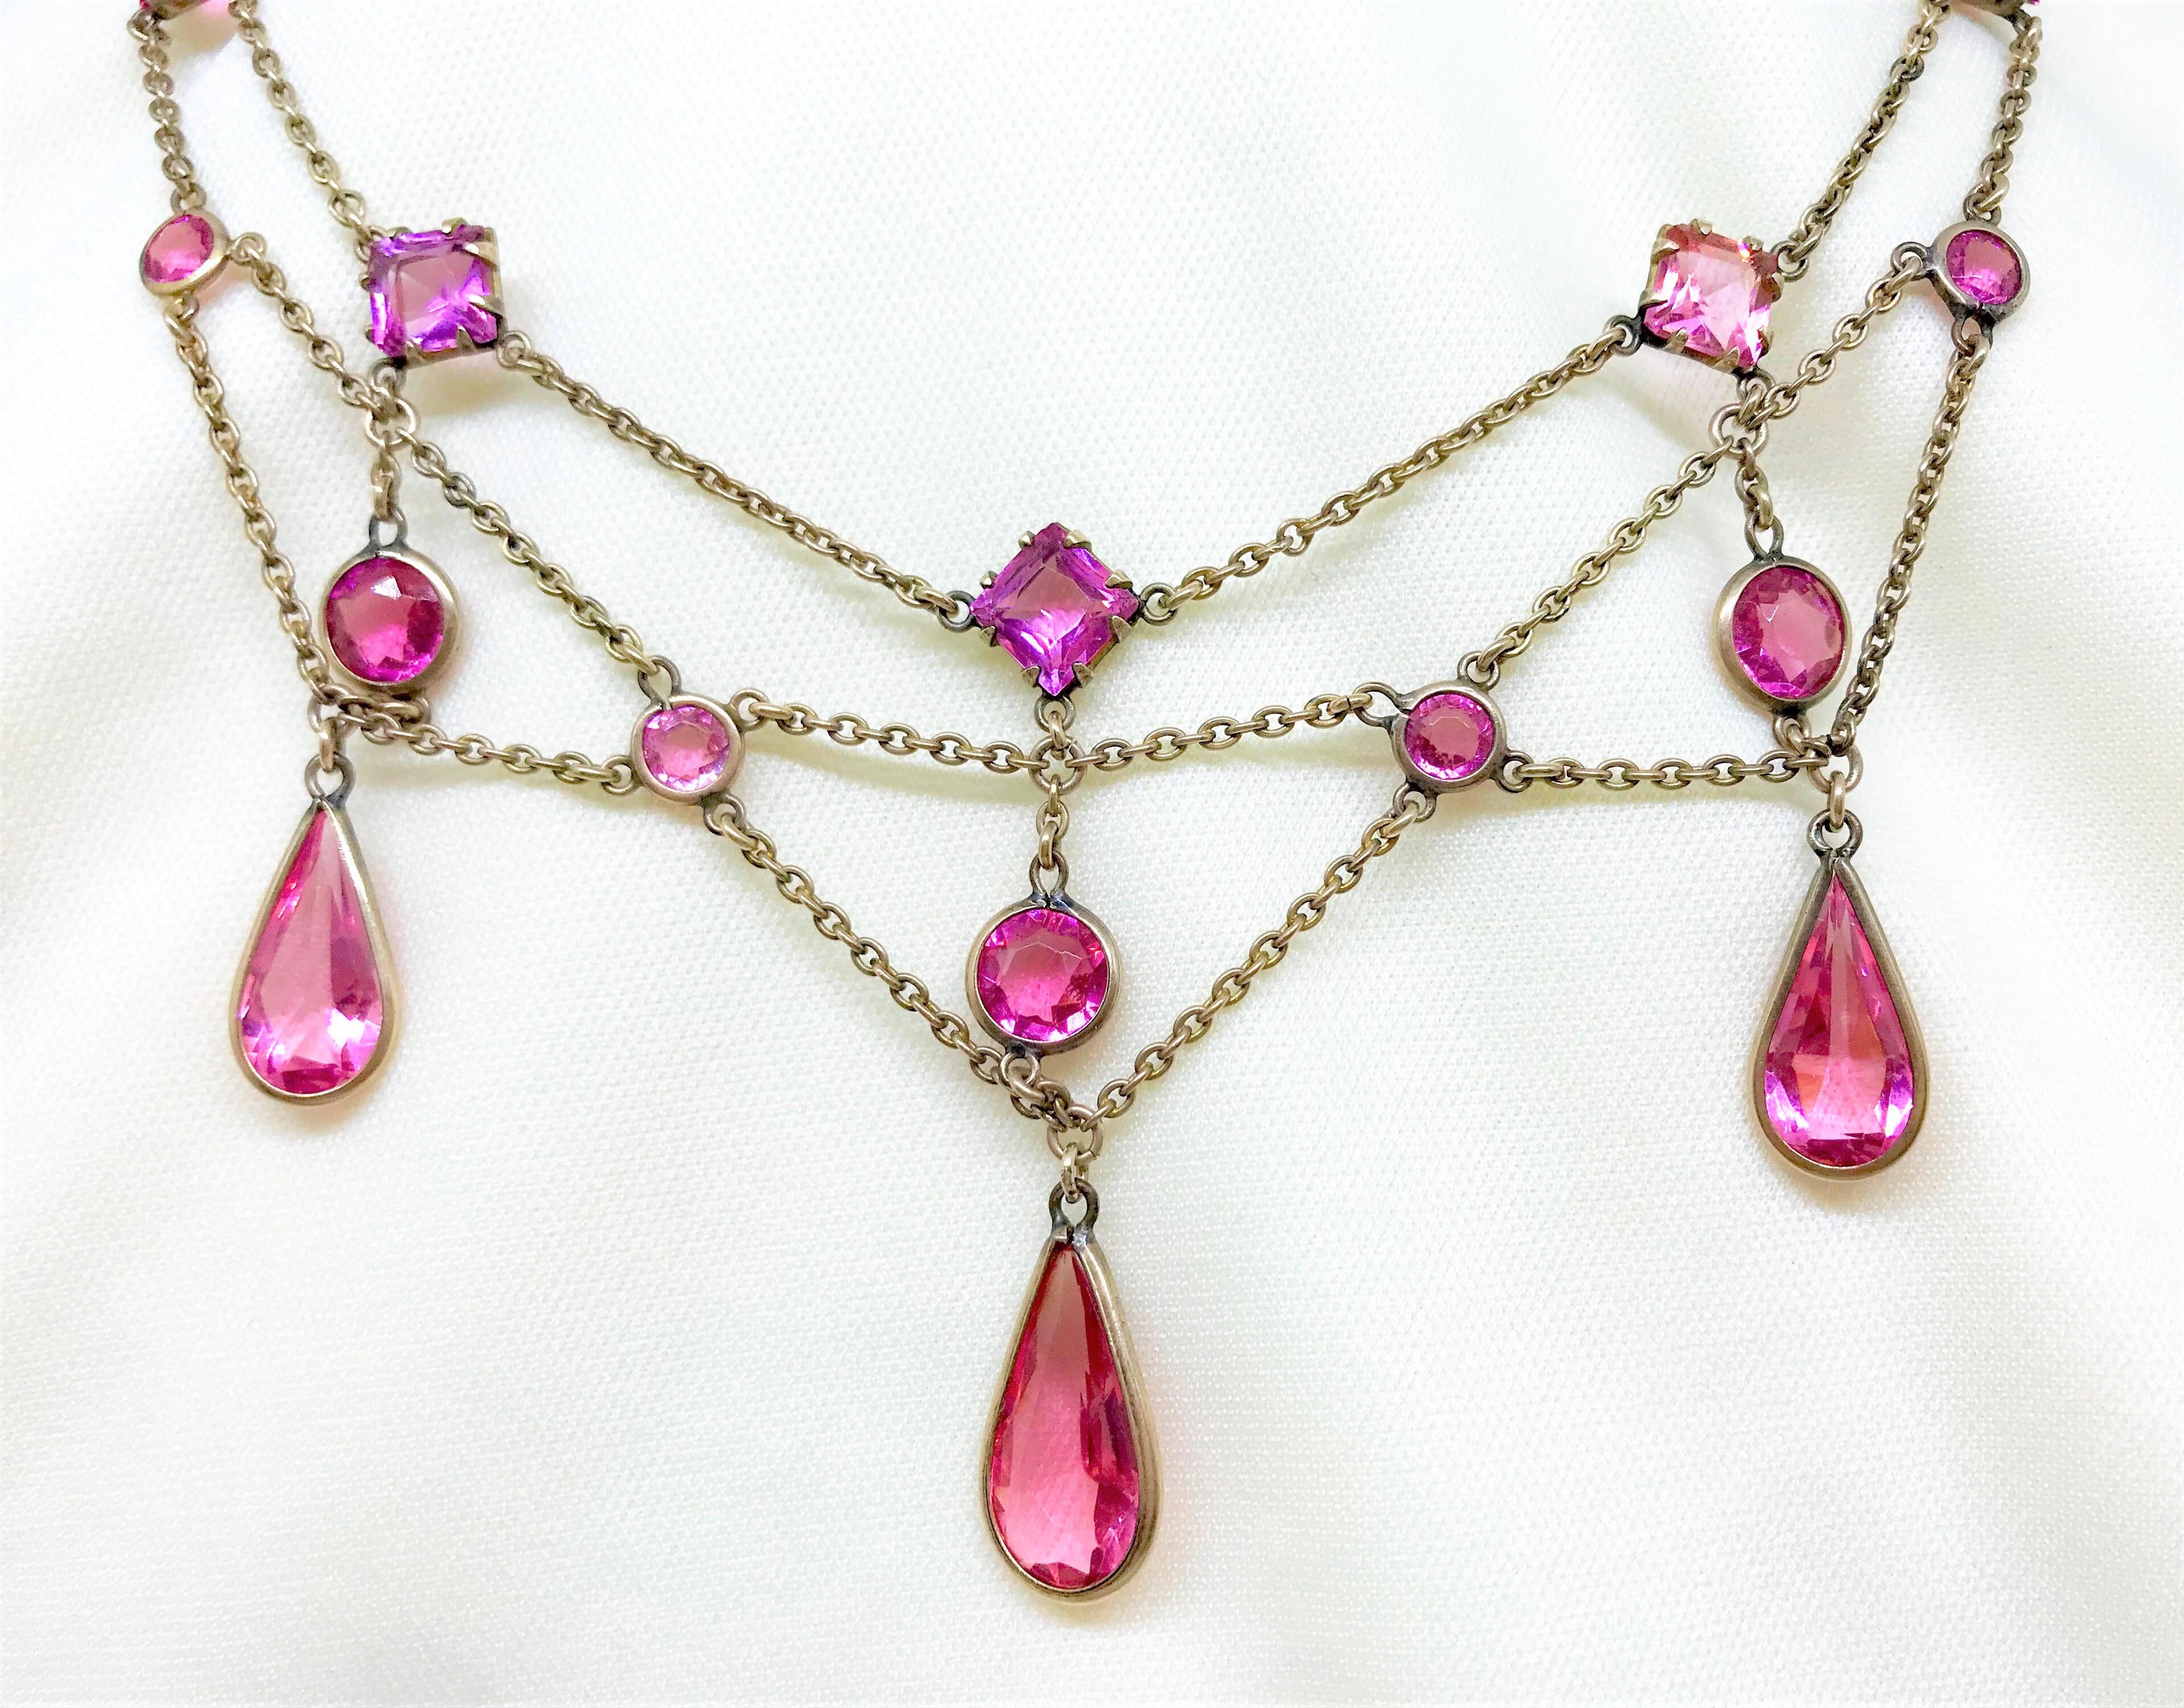 Early 1900s Gold-Filled chain festoon necklace bezel and prong set with round and square bright pink faceted glass stones.  The necklace is embellished with three larger bezel set pear-shape faceted drops at the bottom.  It measures 15.65